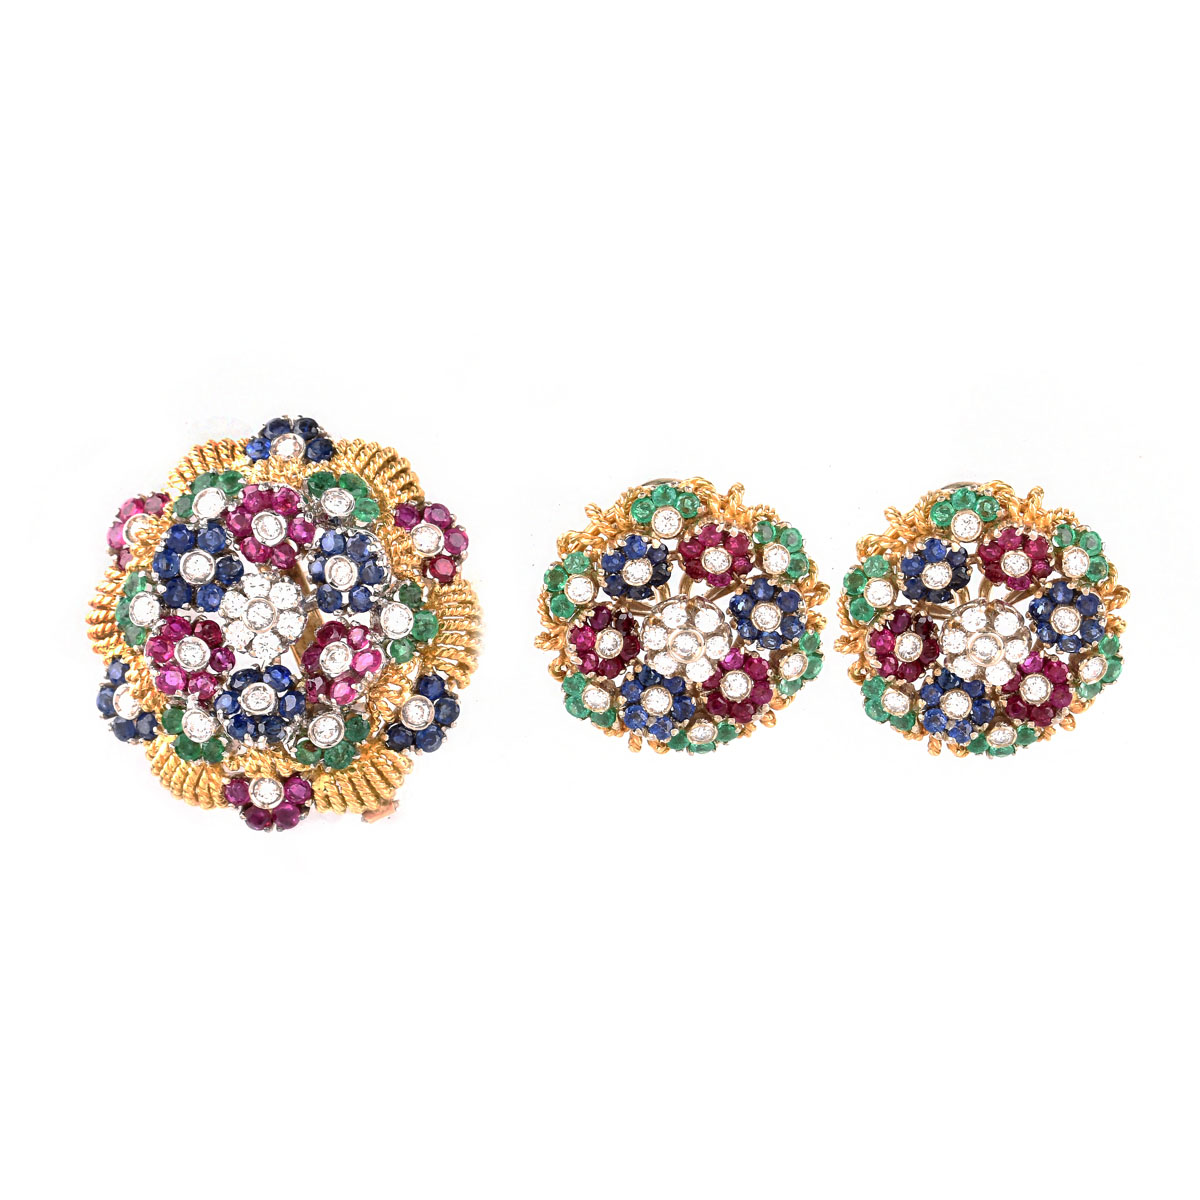 Vintage Italian Lunati Diamond, Emerald, Sapphire, Ruby and 18 Karat Yellow Gold Brooch and Earring Suite en tremblant. Fine quality stones throughout.